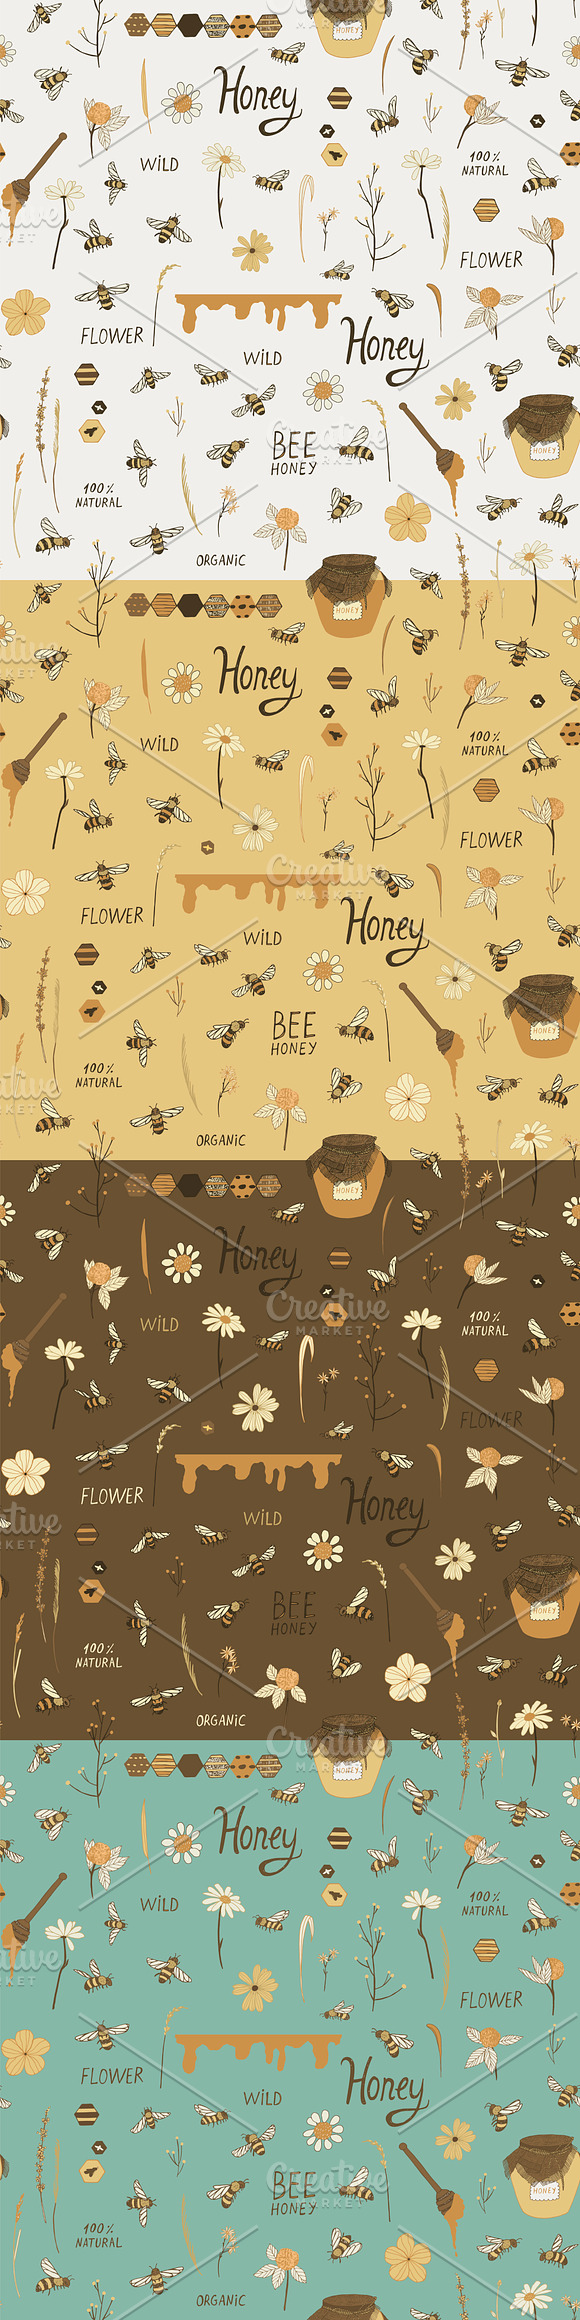 Bees and Honey in Patterns - product preview 1